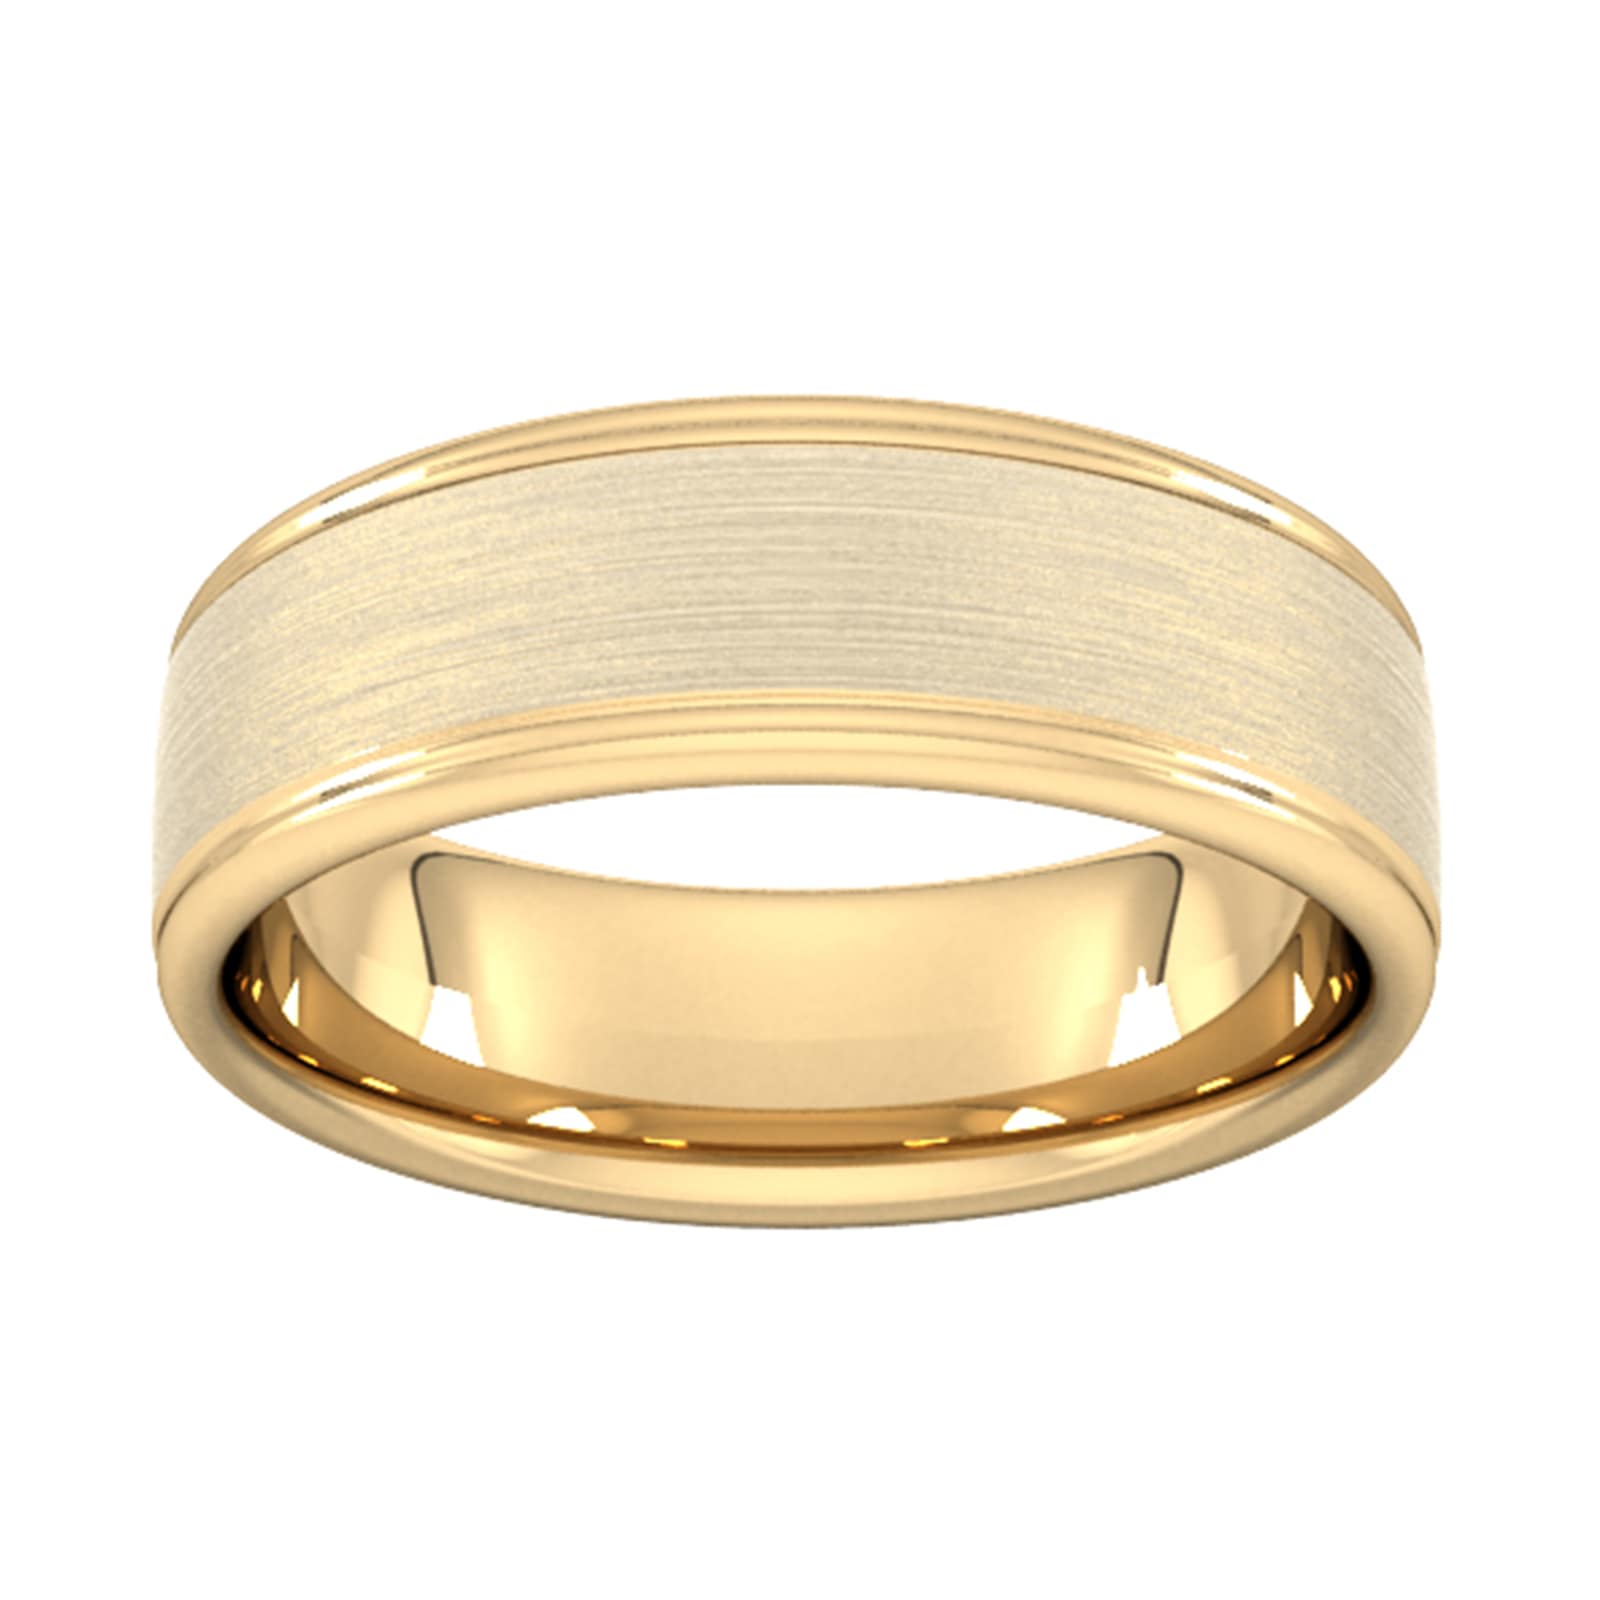 7mm D Shape Standard Matt Centre With Grooves Wedding Ring In 9 Carat Yellow Gold - Ring Size S